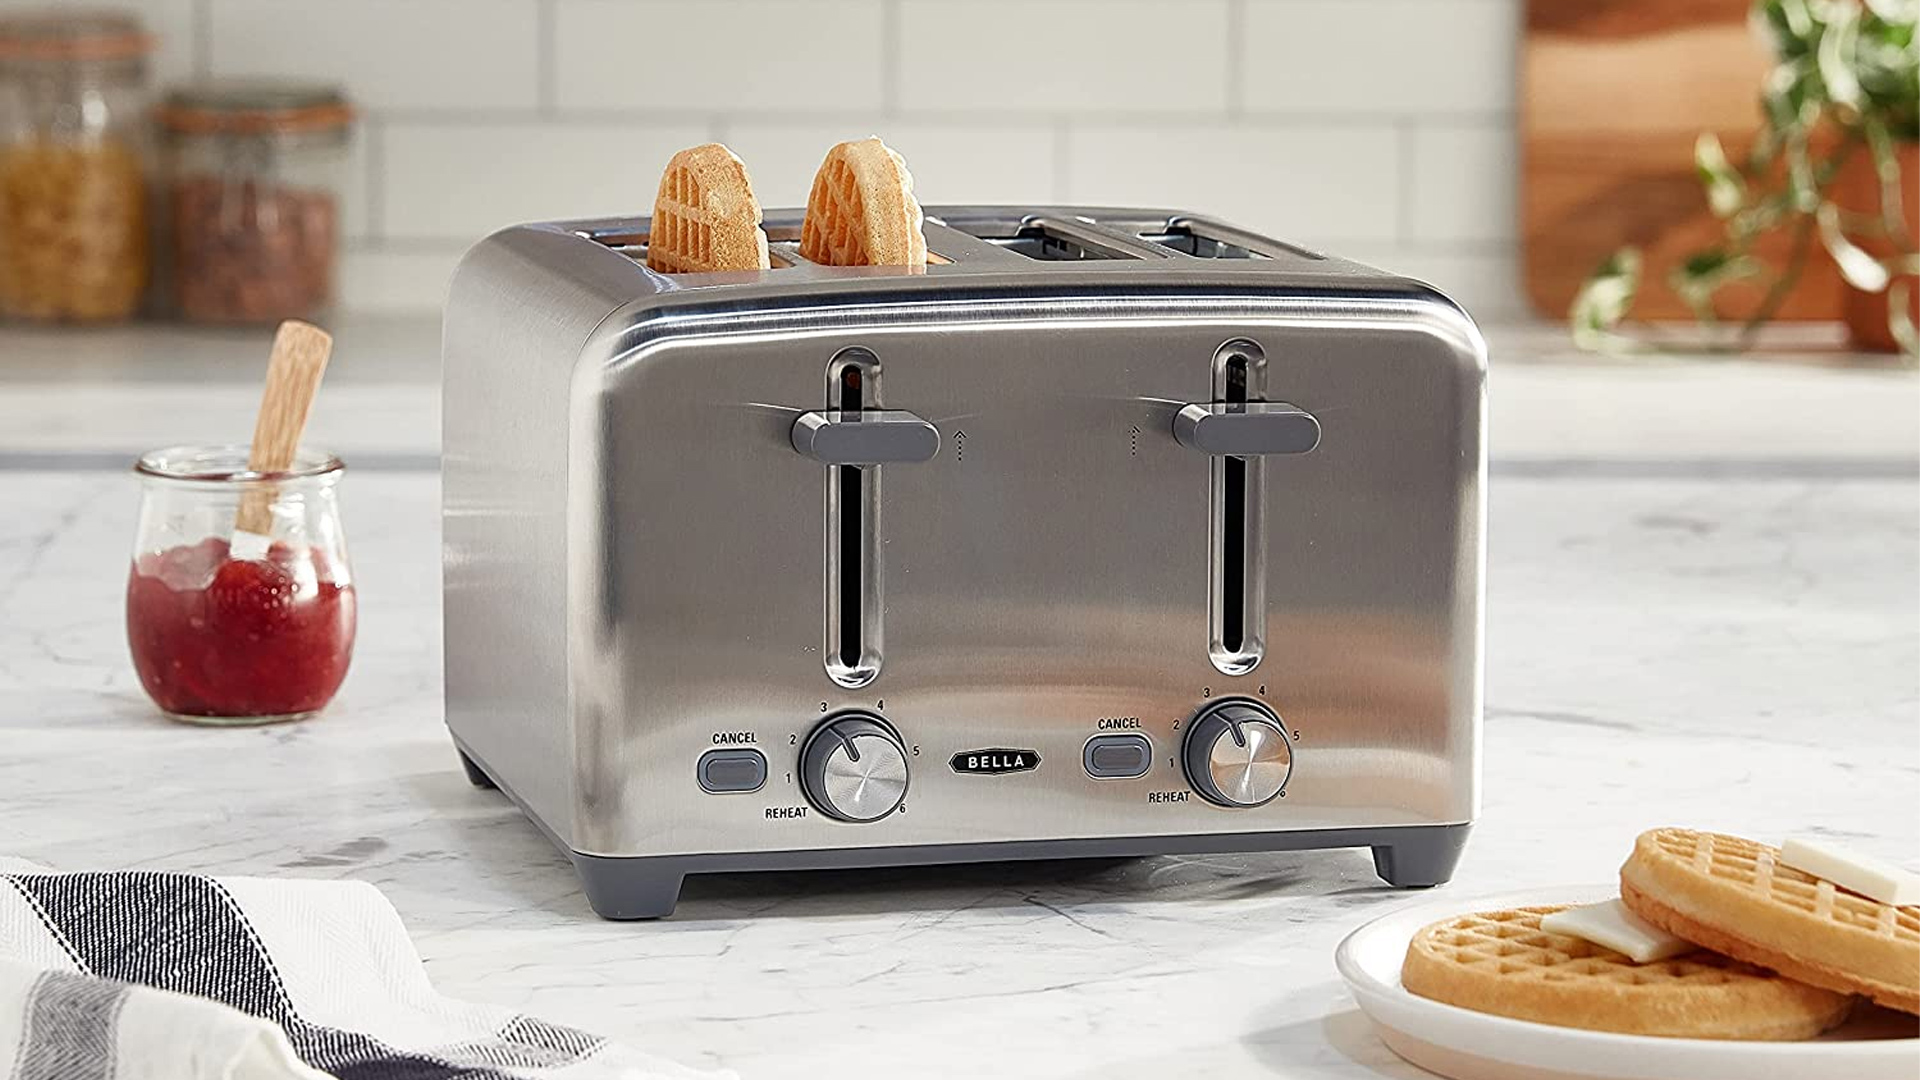 BELLA's 4-slice toaster falls to  low at 30% off, now $24.50 Prime  shipped